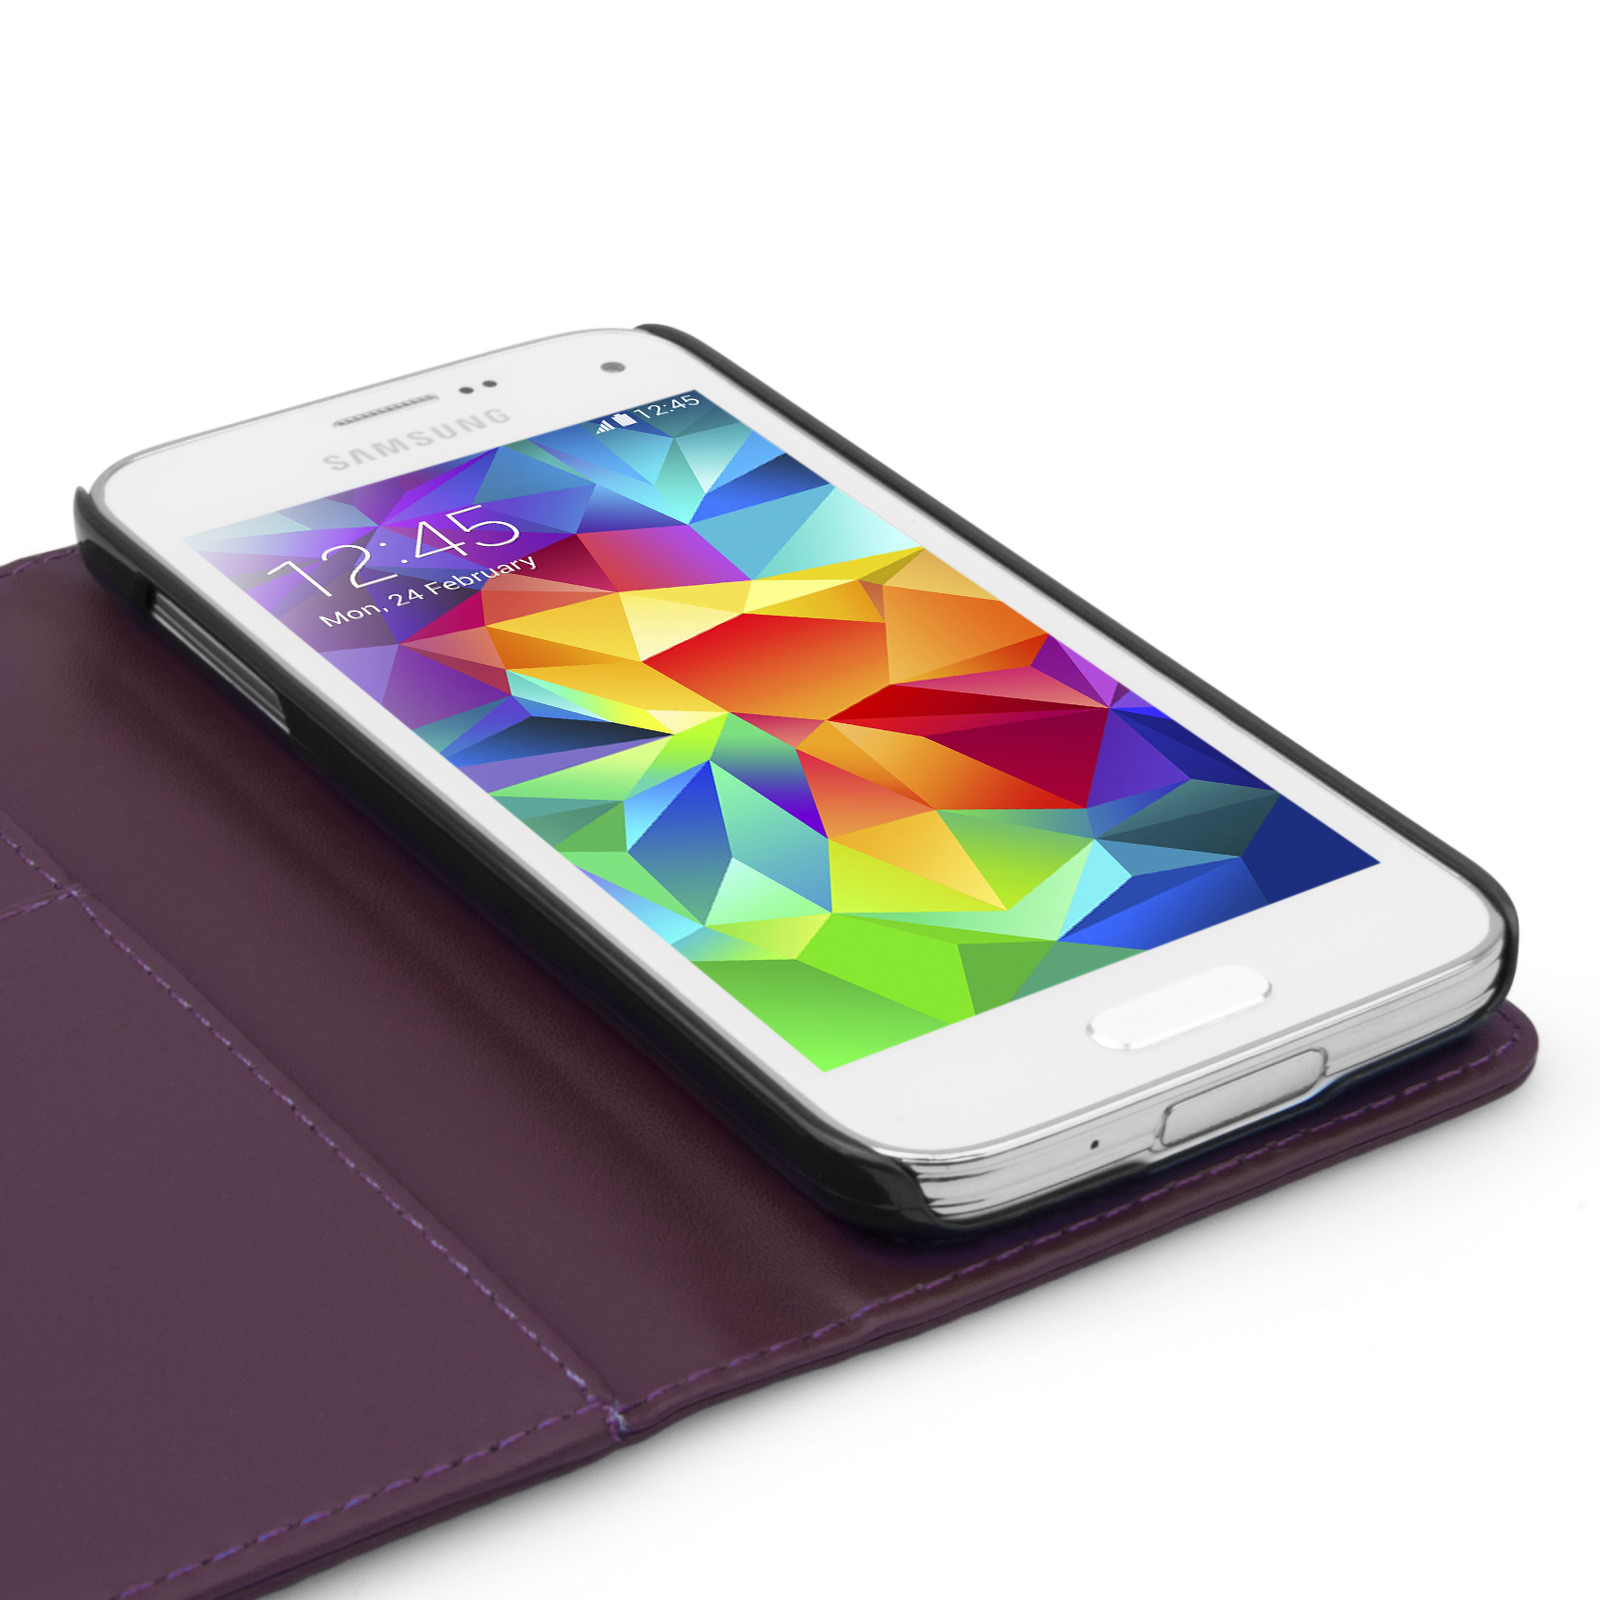 YouSave Samsung Galaxy S5 Mini Leather-Effect Wallet Case - Purple